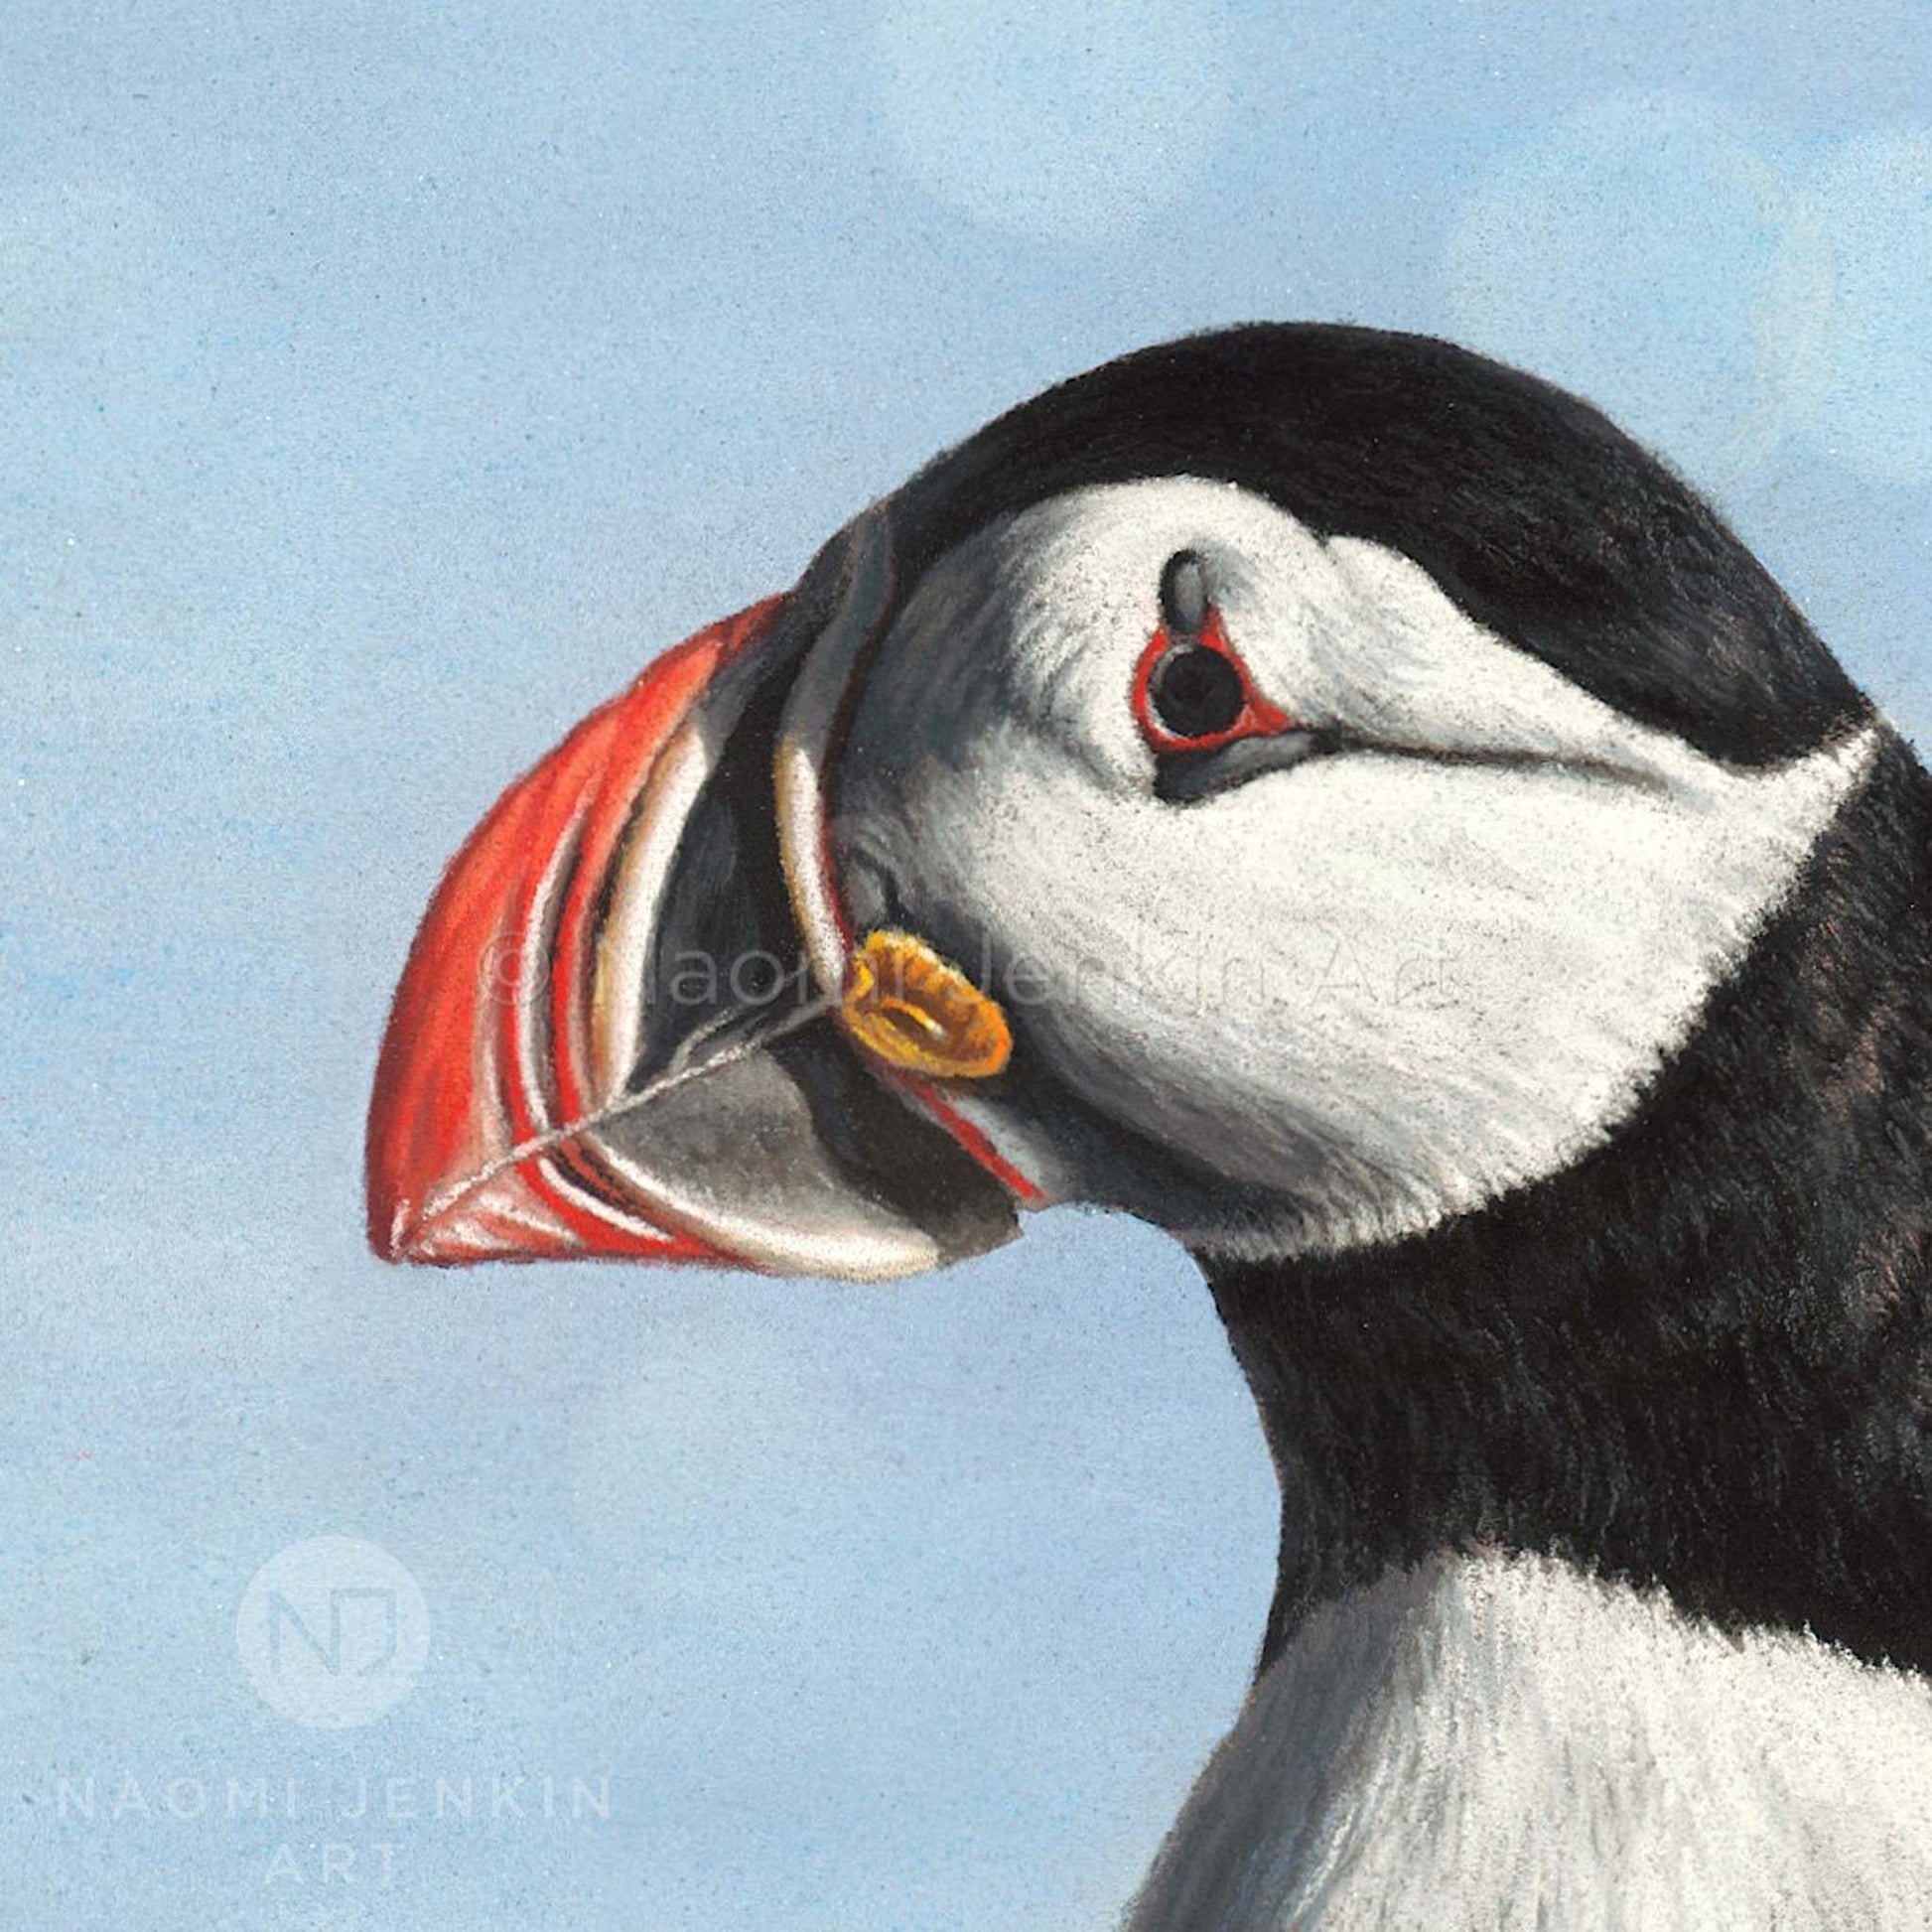 Close up puffin face and beak from the 'Puffins' original painting by Naomi Jenkin